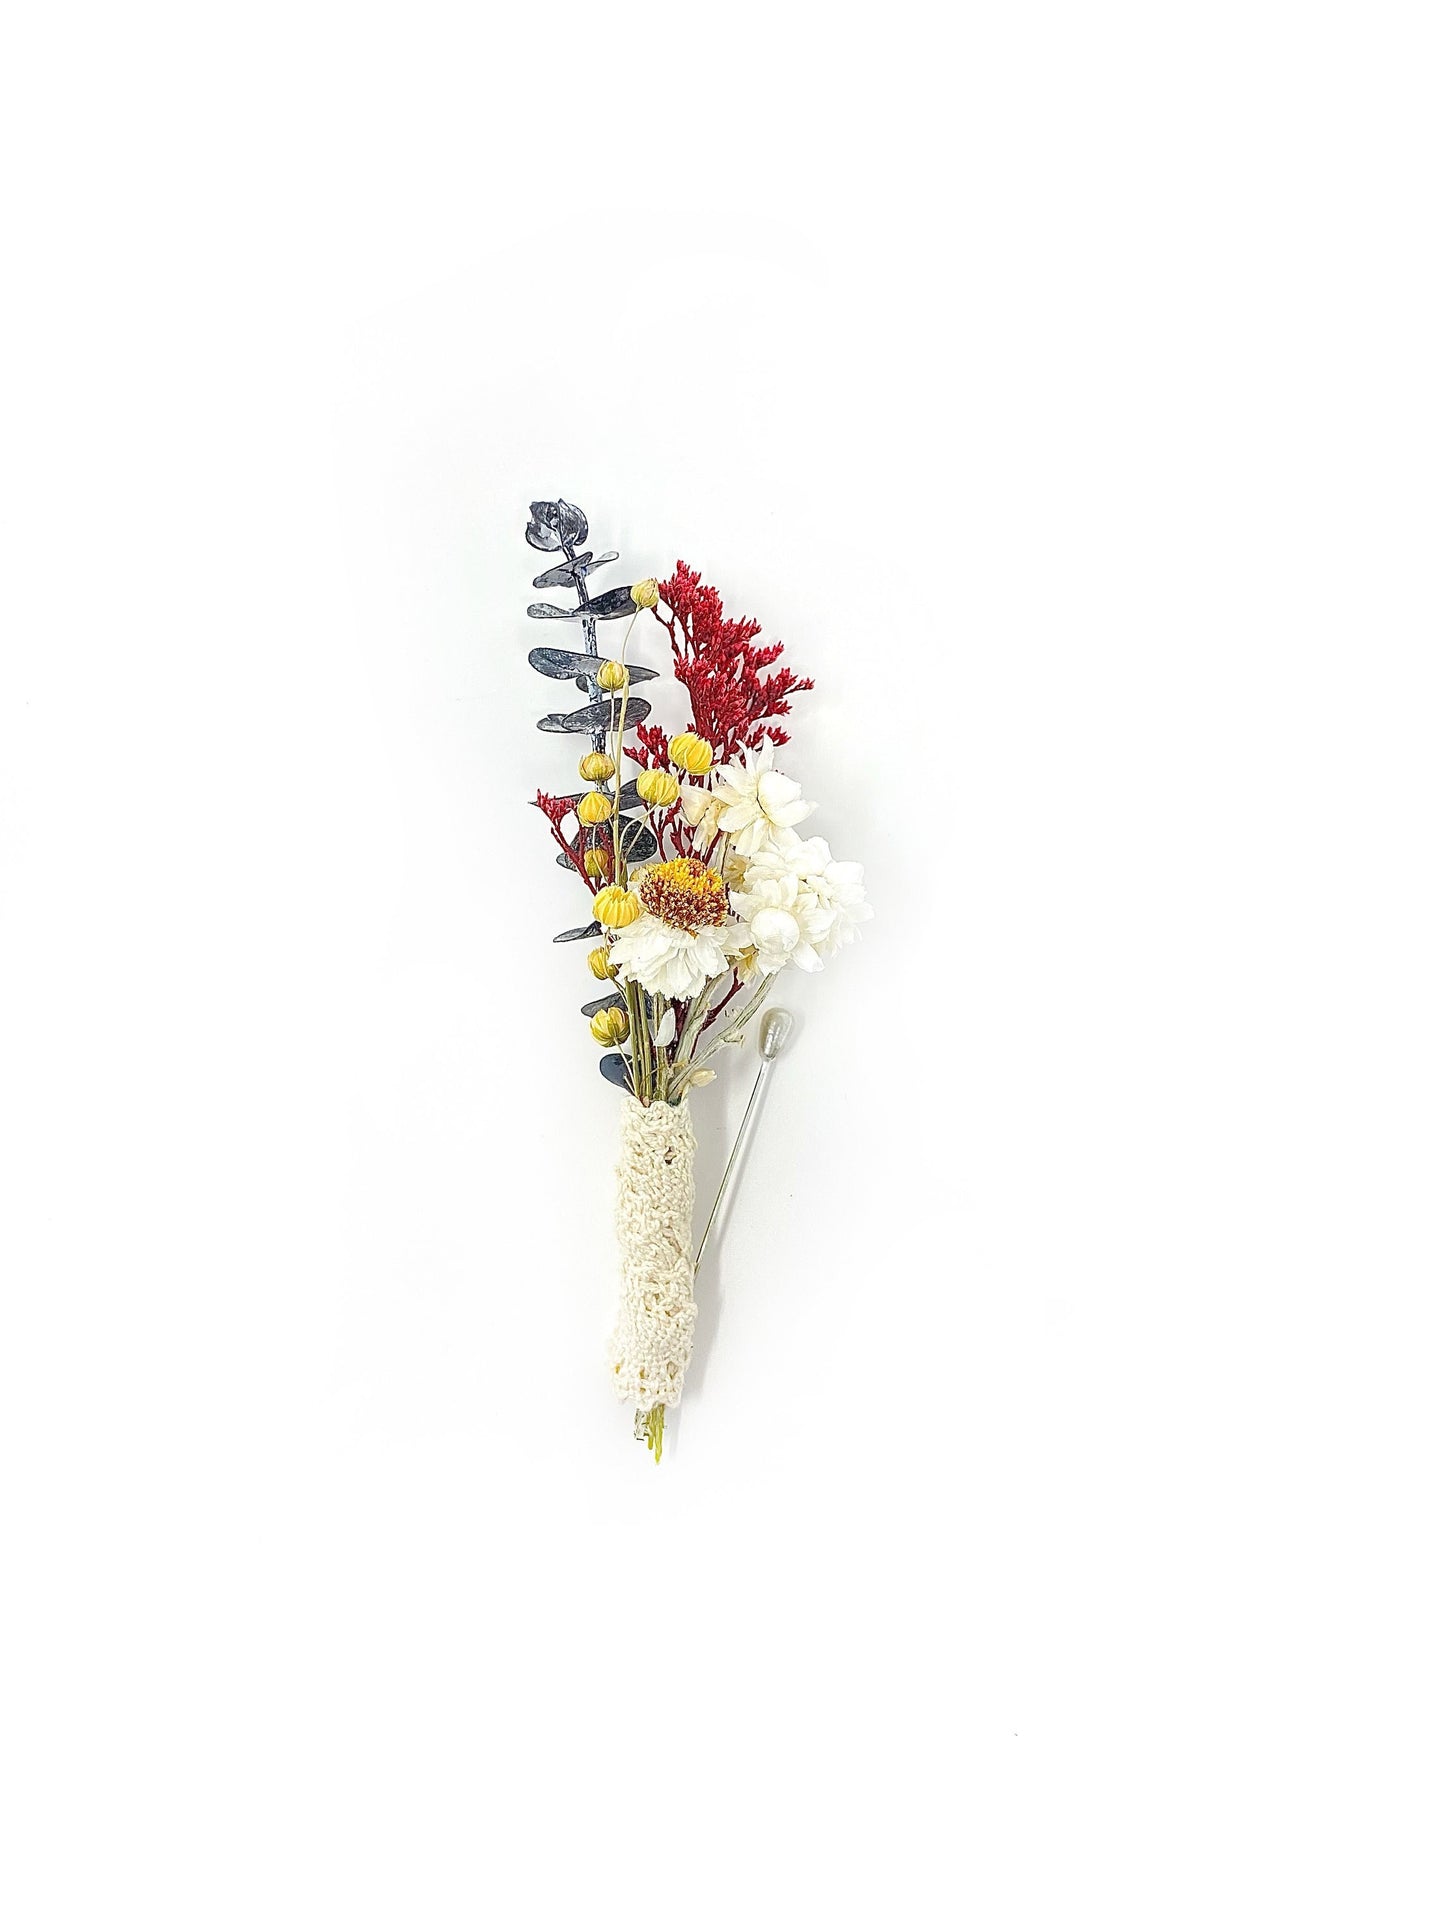 Wedding Boutonniere, Dried Flowers, Bridal Accessories, Preserved Floral, Prom, Ammobium, Red and Blue, Caspia